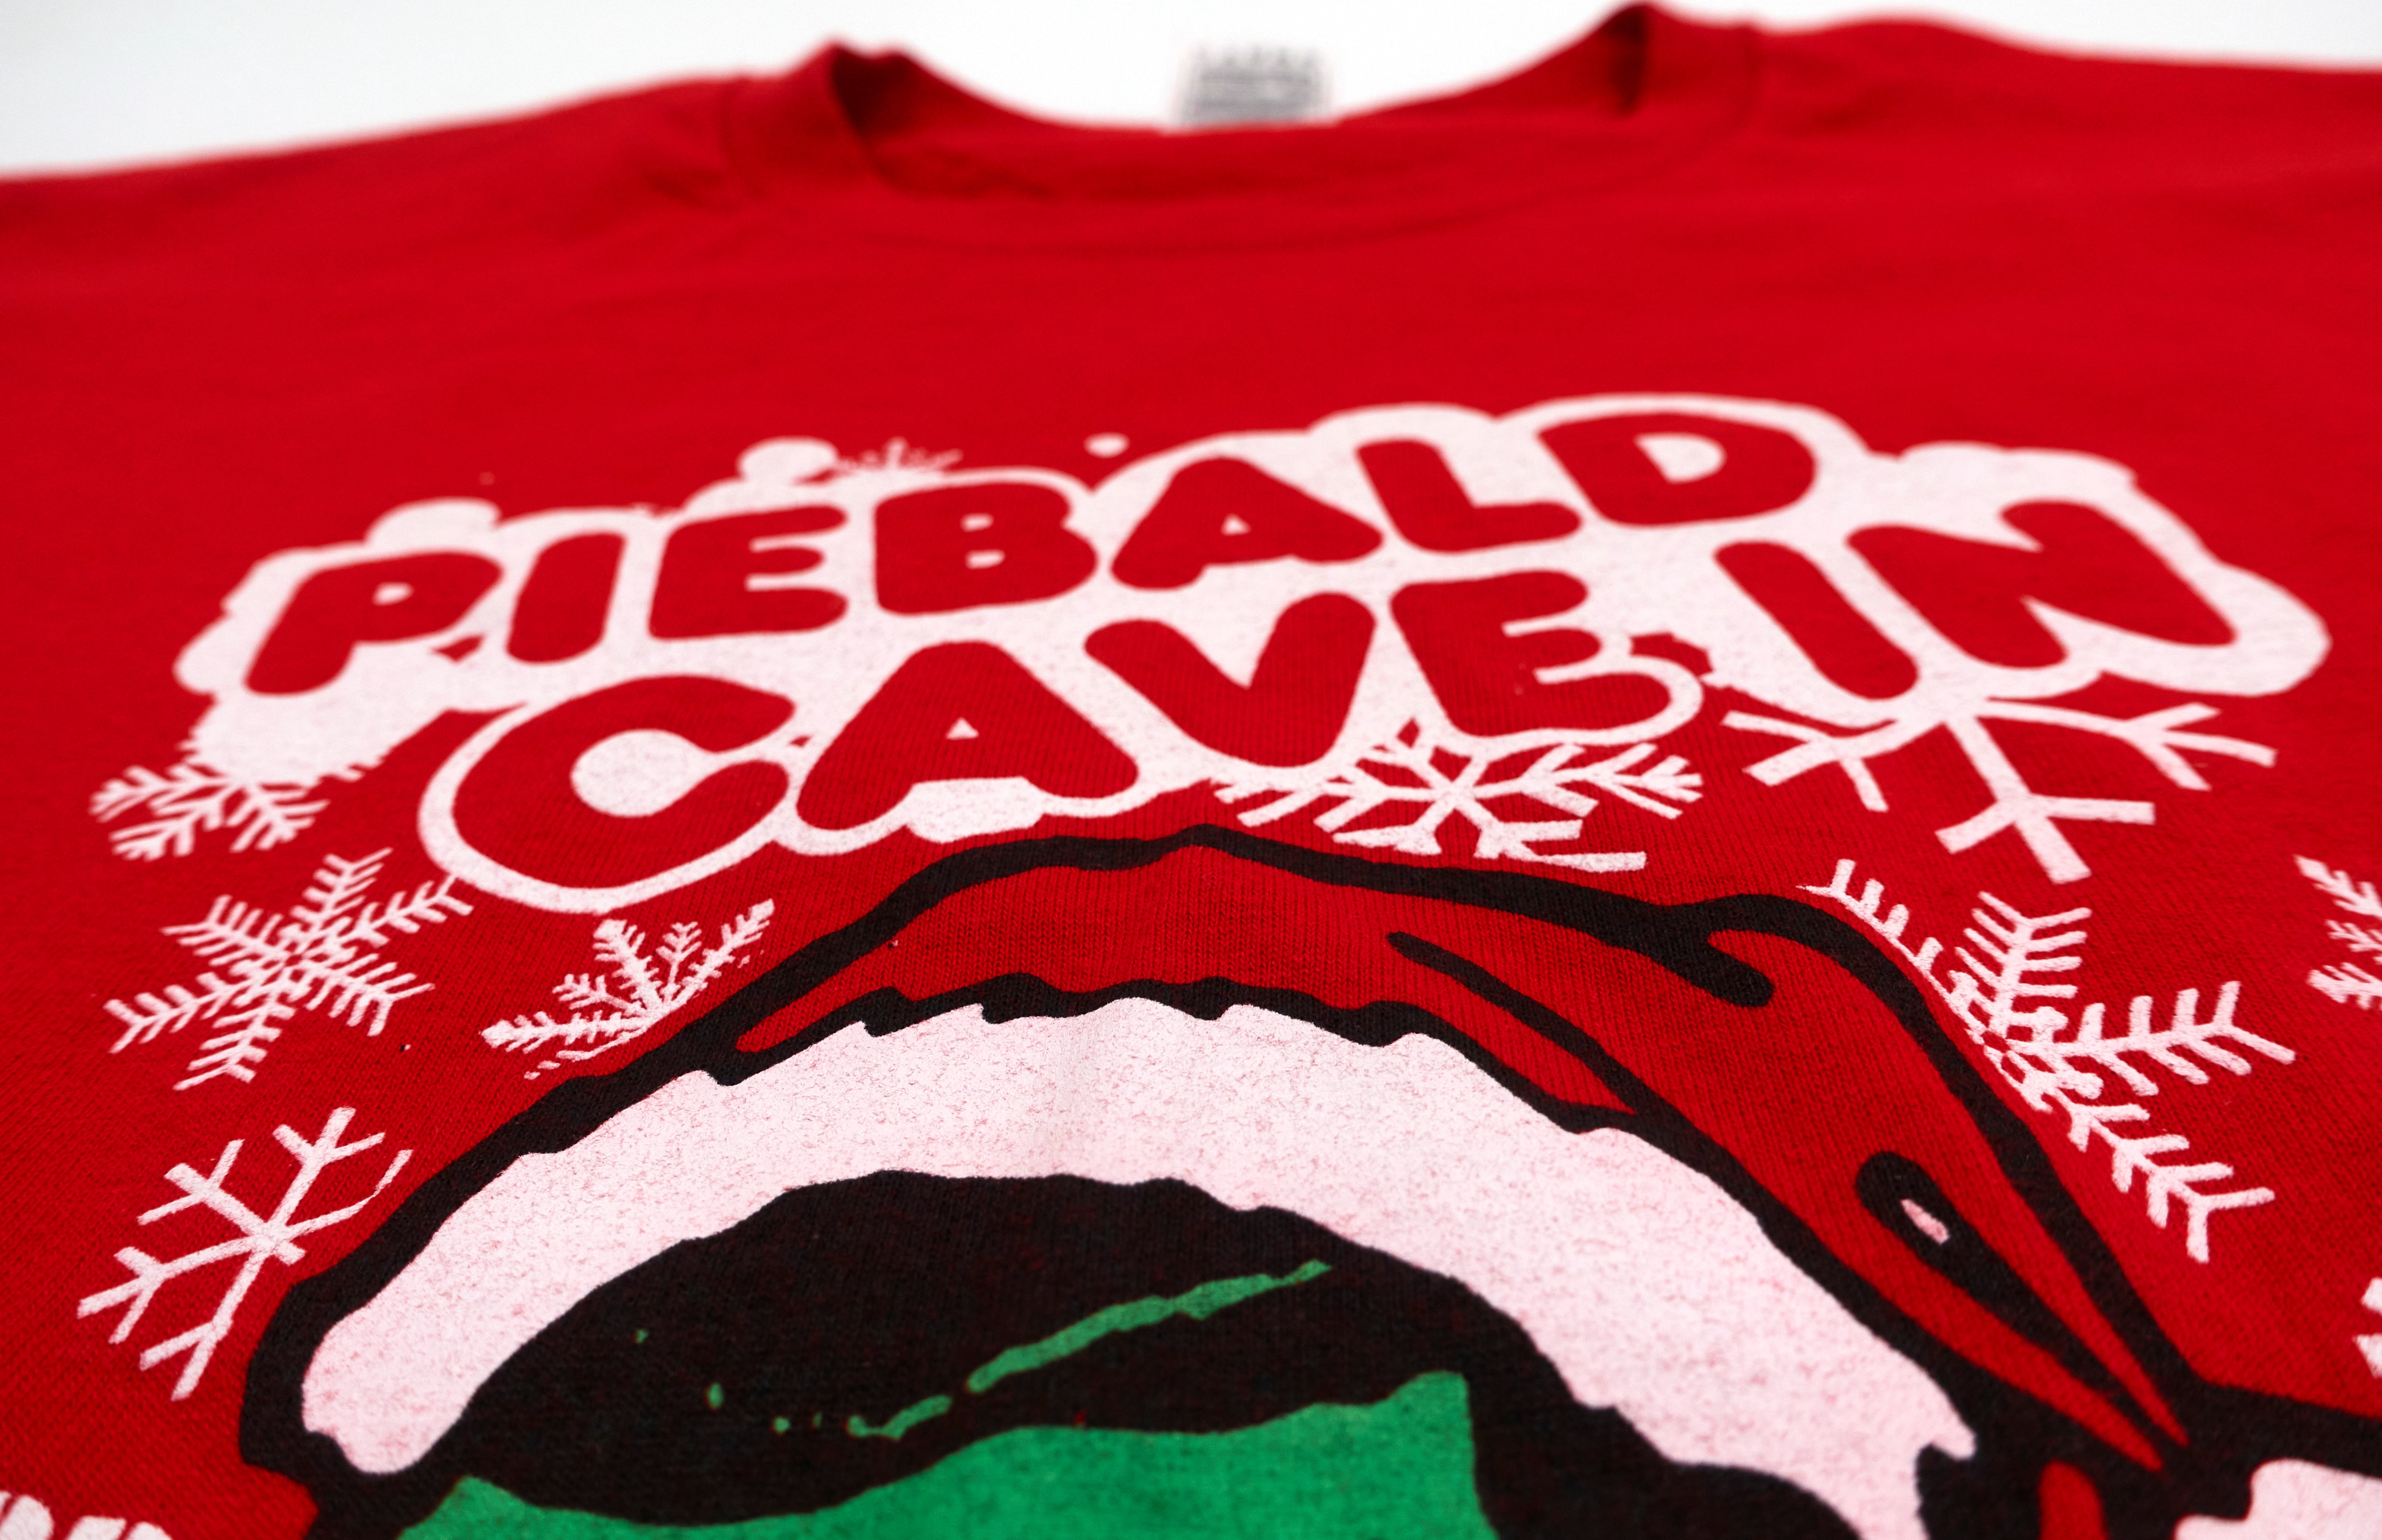 Cave-In / Piebald - Christmas With Spock 3rd Annual 2003 Tour Shirt Size Large